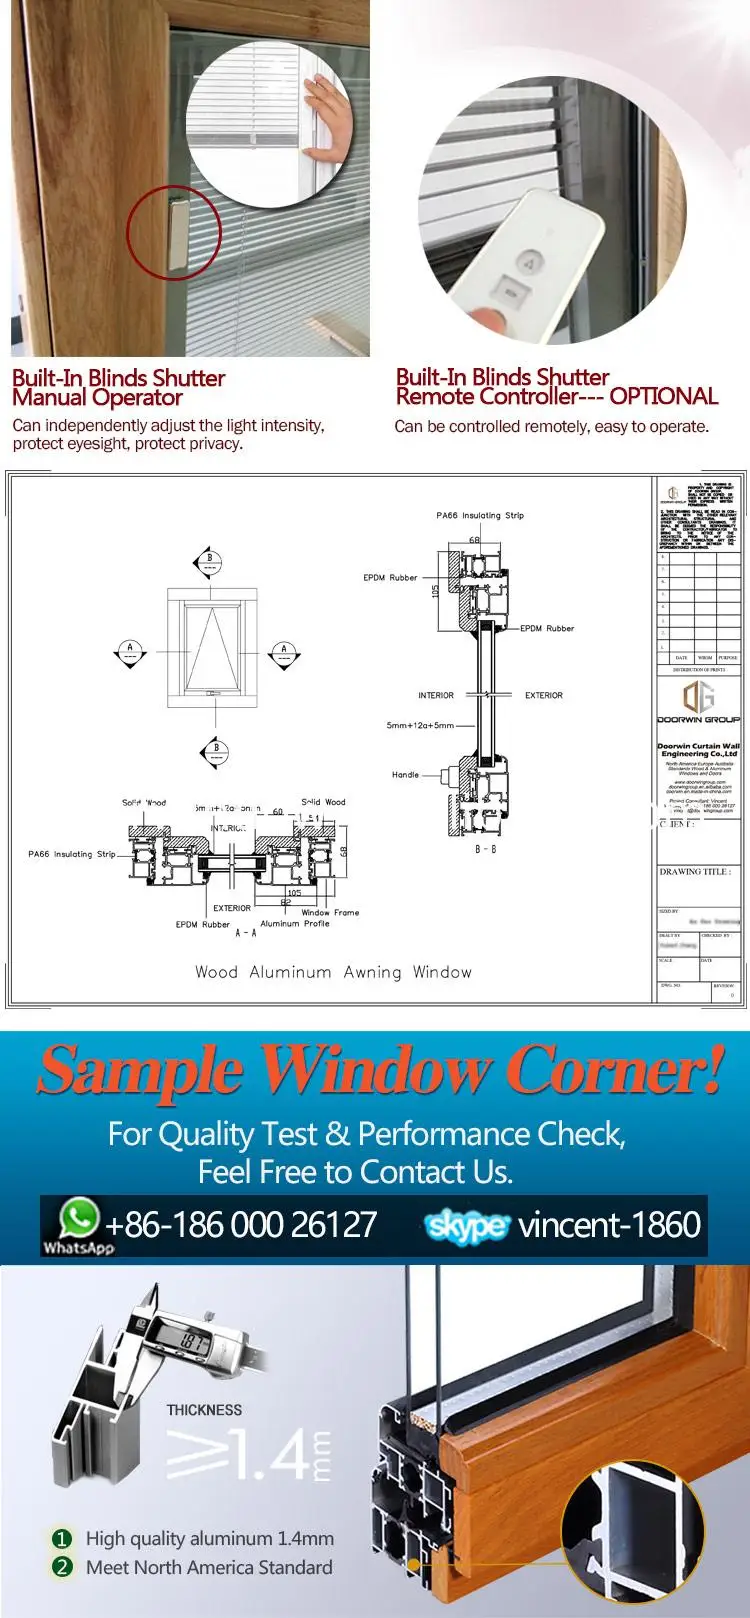 China manufacturer converting single pane windows to double contemporary window frames